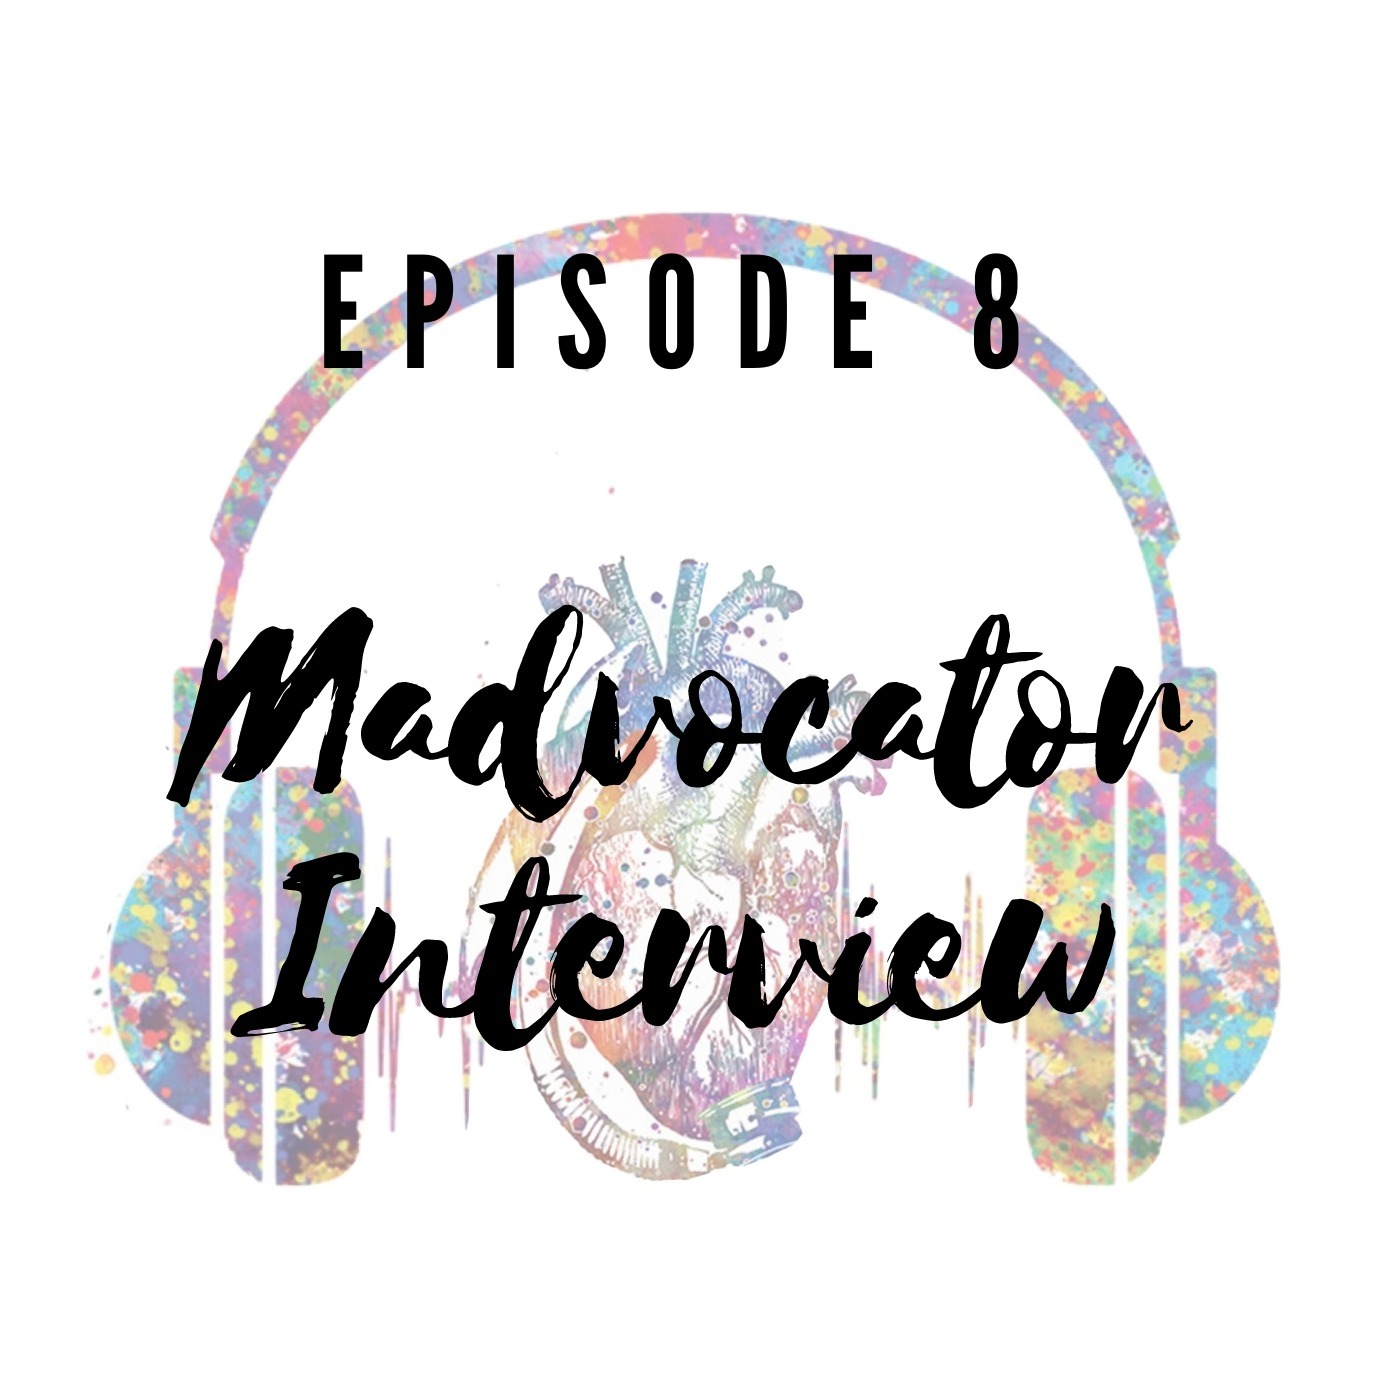 Episode 8: Advocacy, Bias and Health Literacy with Guest Nikki Montgomery at Madvocator